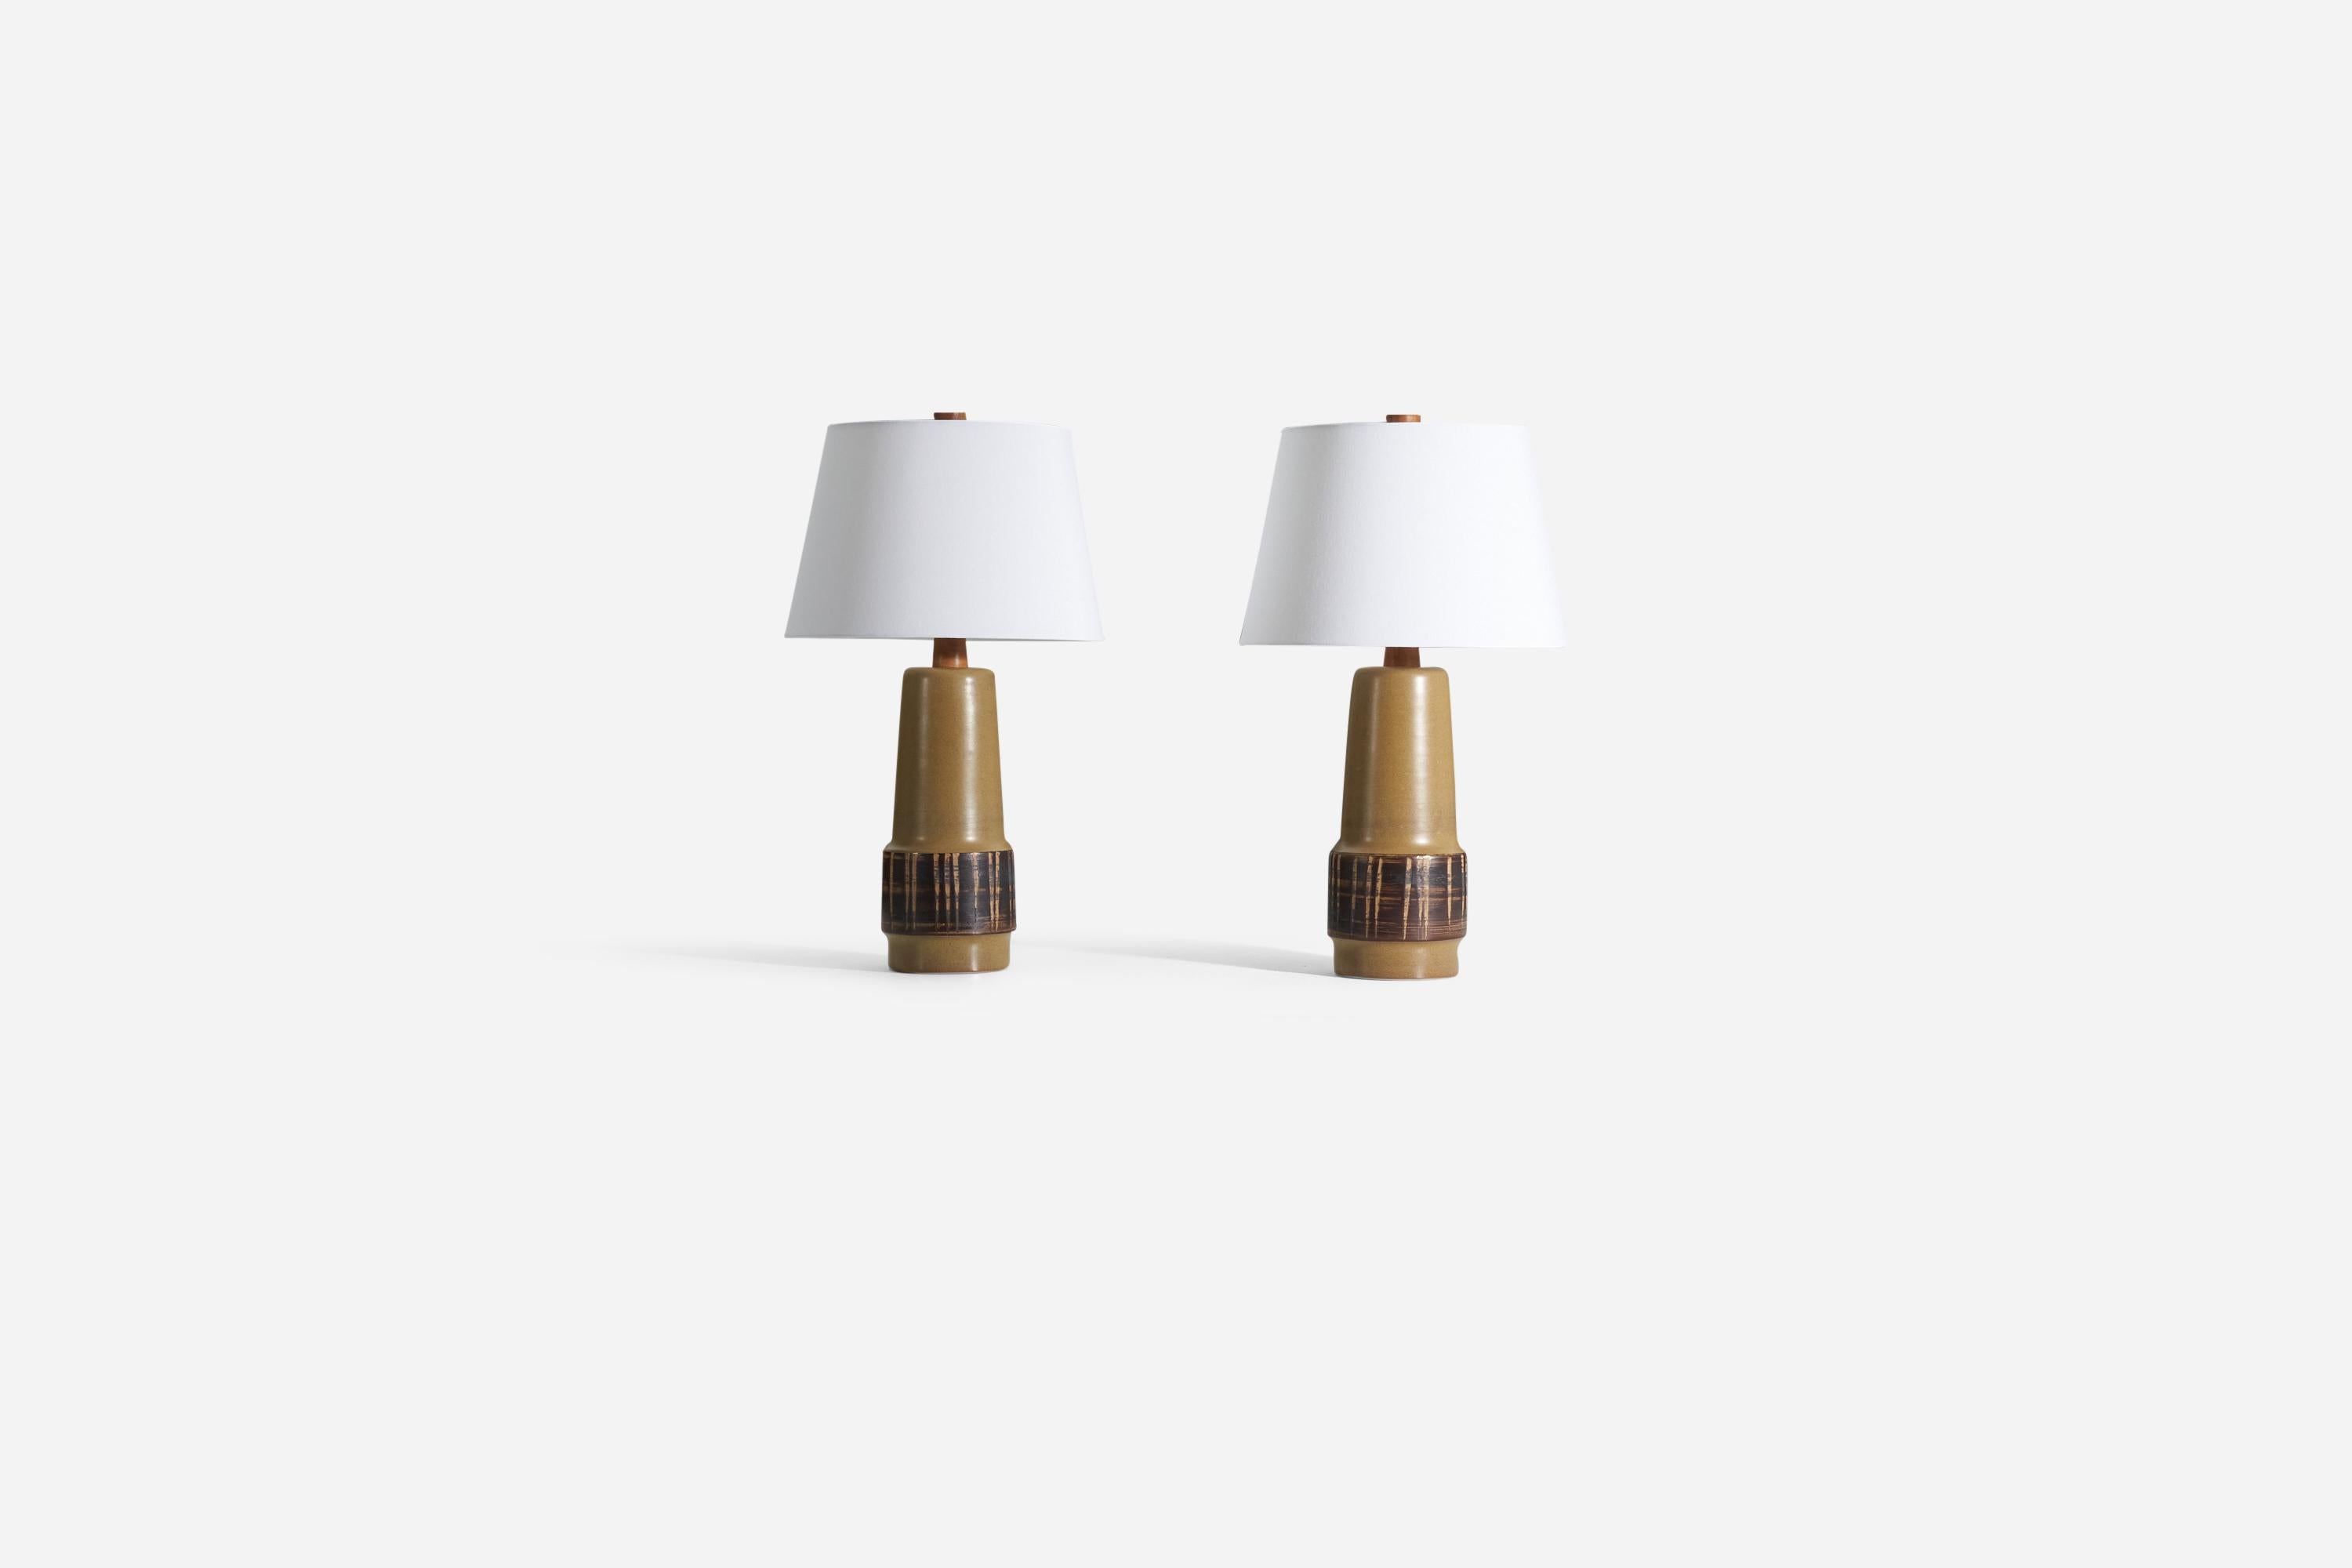 A pair of table lamps designed by husband and wife duo Jane & Gordon Martz. Produced by Marshall Studios, Veedersburg, Indiana. The base is slip-cast and then dipped into glaze and hand-painted. The design also incorporates an exquisite walnut neck